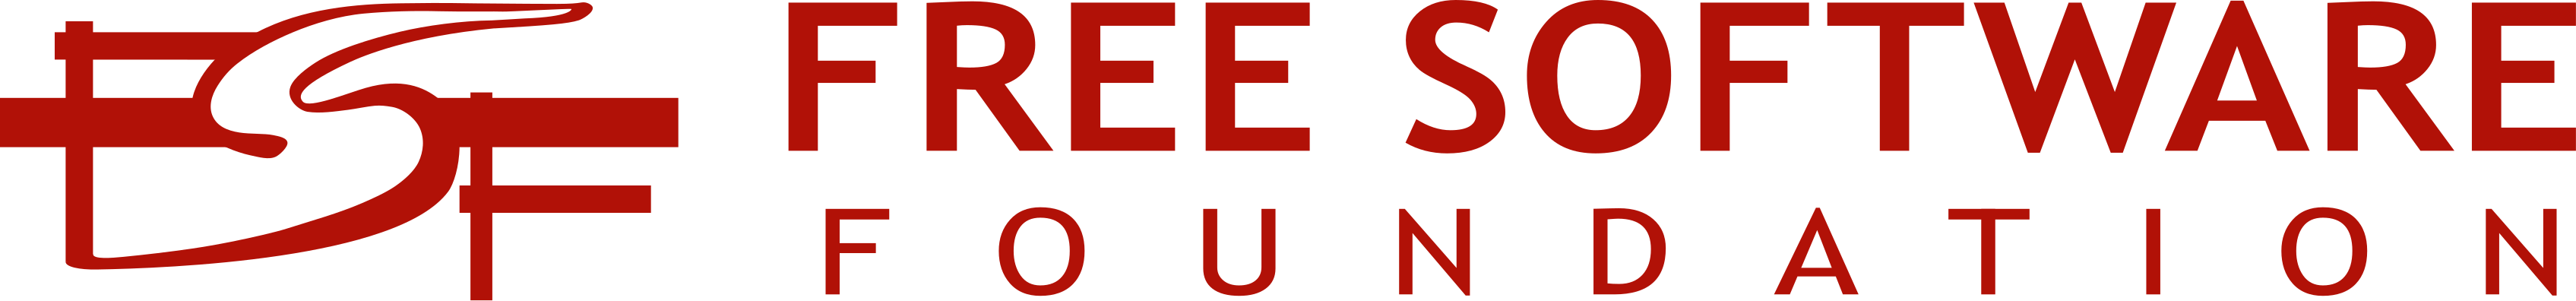 Download File:Free Software Foundation logo and wordmark.svg - Wikipedia, the free encyclopedia